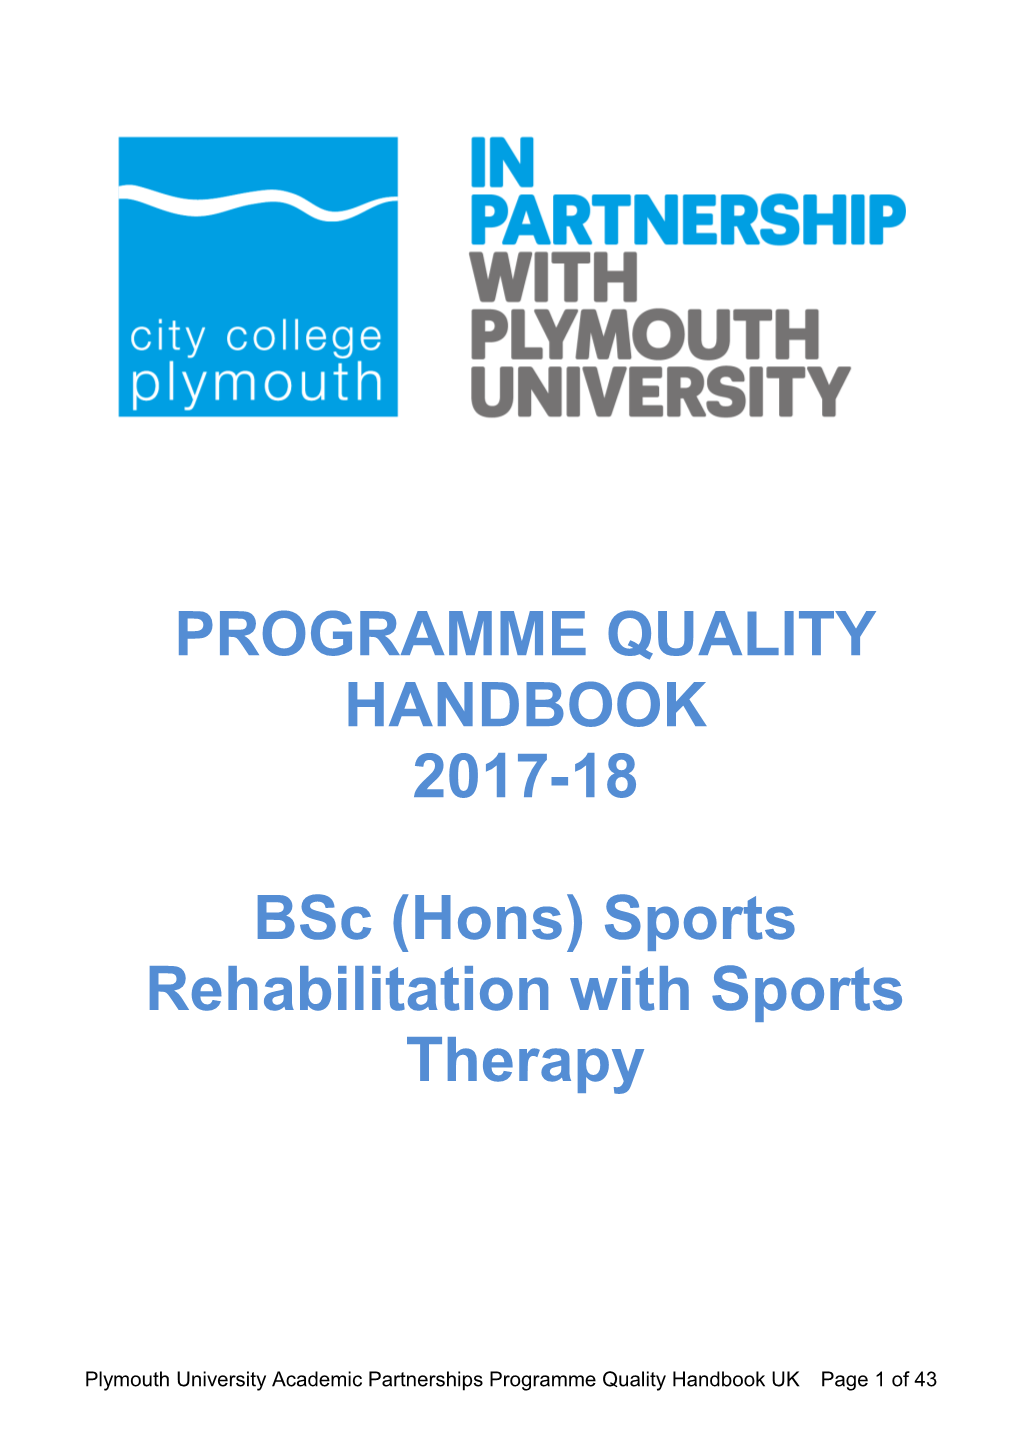 Bsc (Hons) Sports Rehabilitation with Sports Therapy